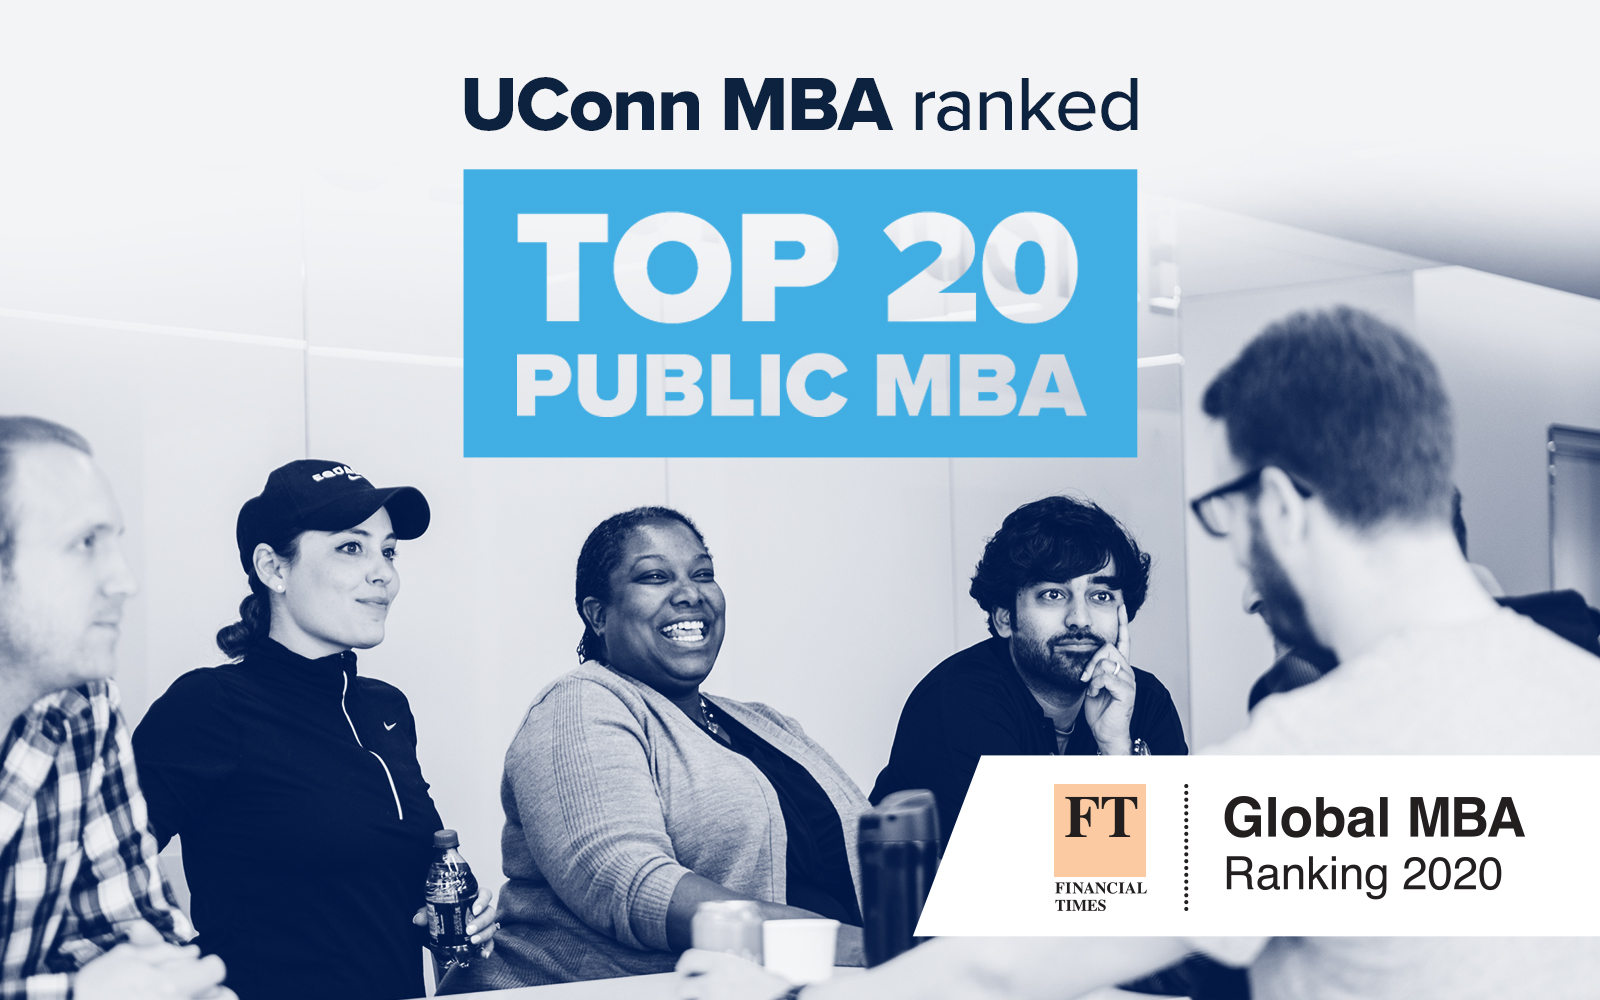 Text: UConn MBA Ranked TOP 20 Public MBA - Group of MBA Students, studying.